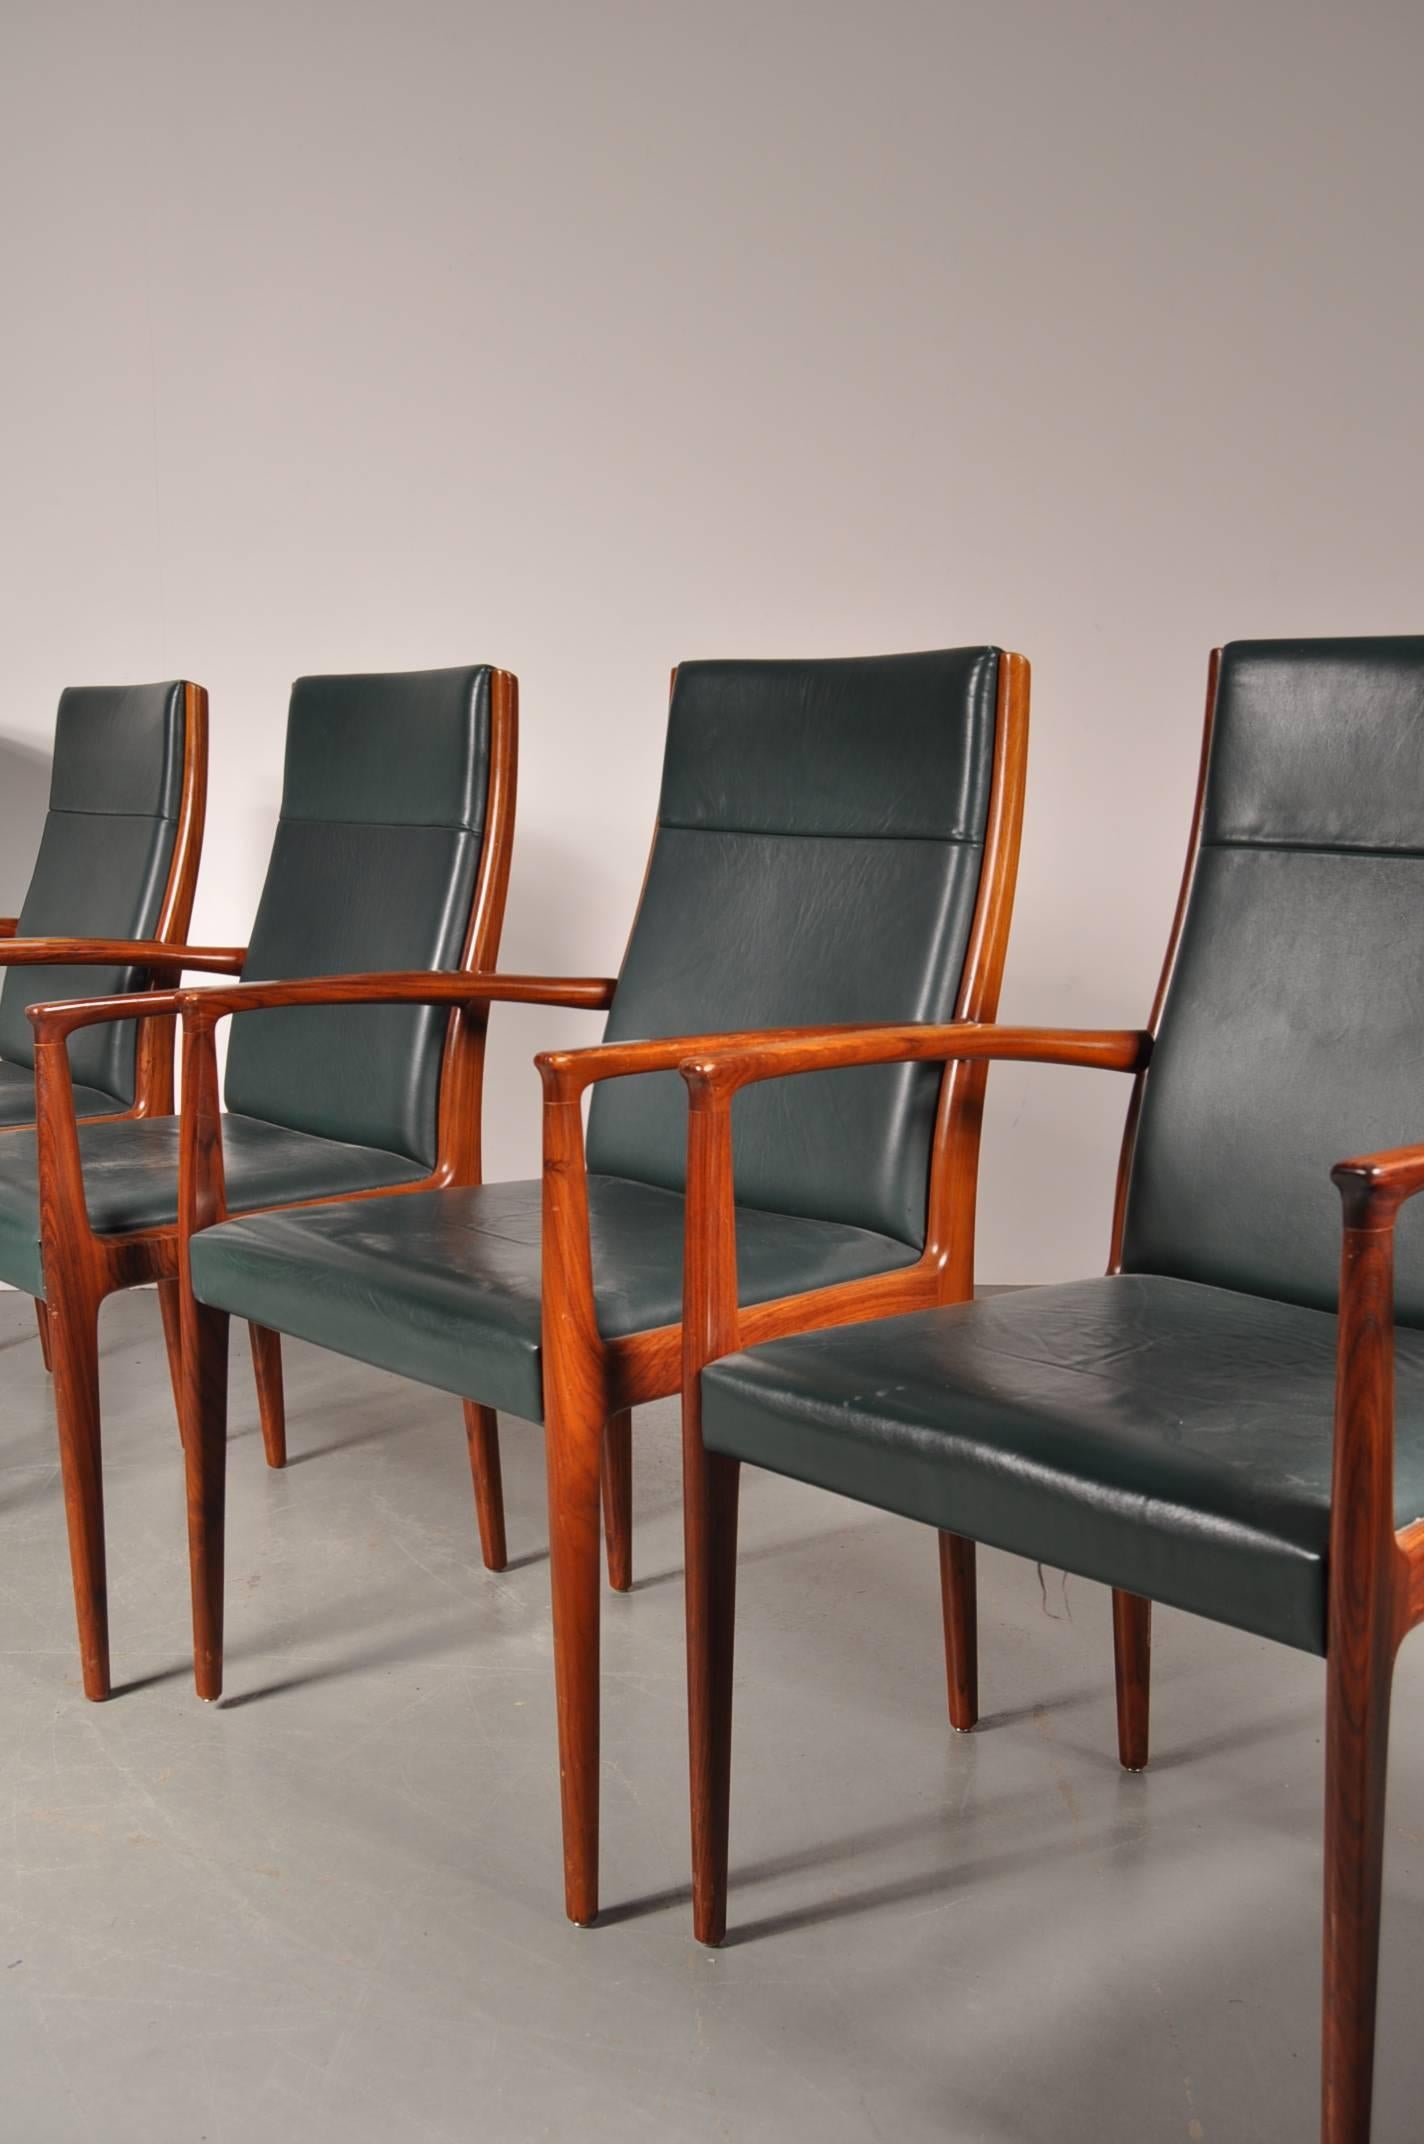 Beautiful set of six conference/dining chairs manufactured by Lübke in Germany around 1960.

These six rare chairs are made of amazing quality rosewood and upholstered in beautiful forest green leather, giving them a very luxurious appearance.